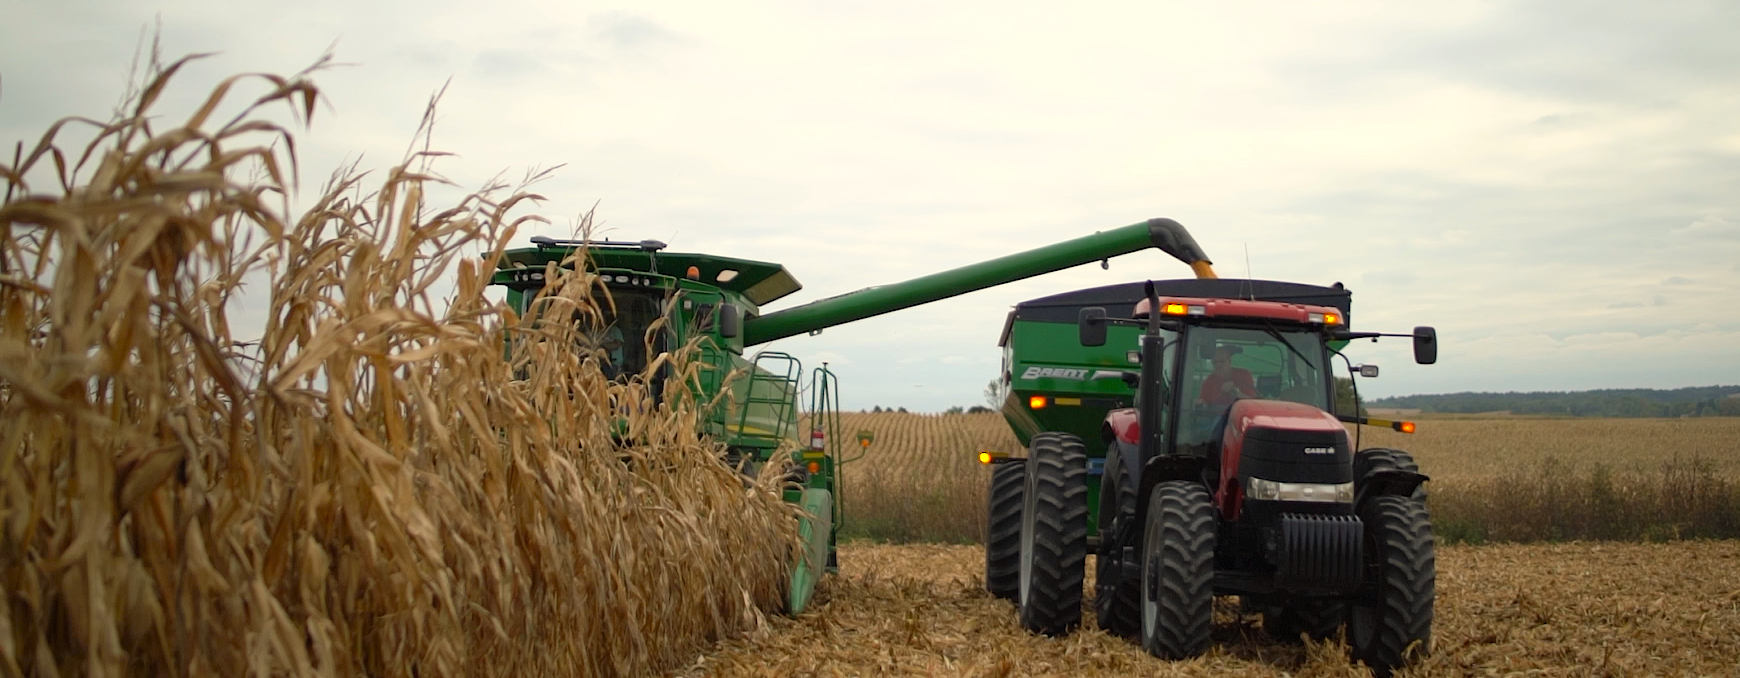 combine and tractor with grain cart